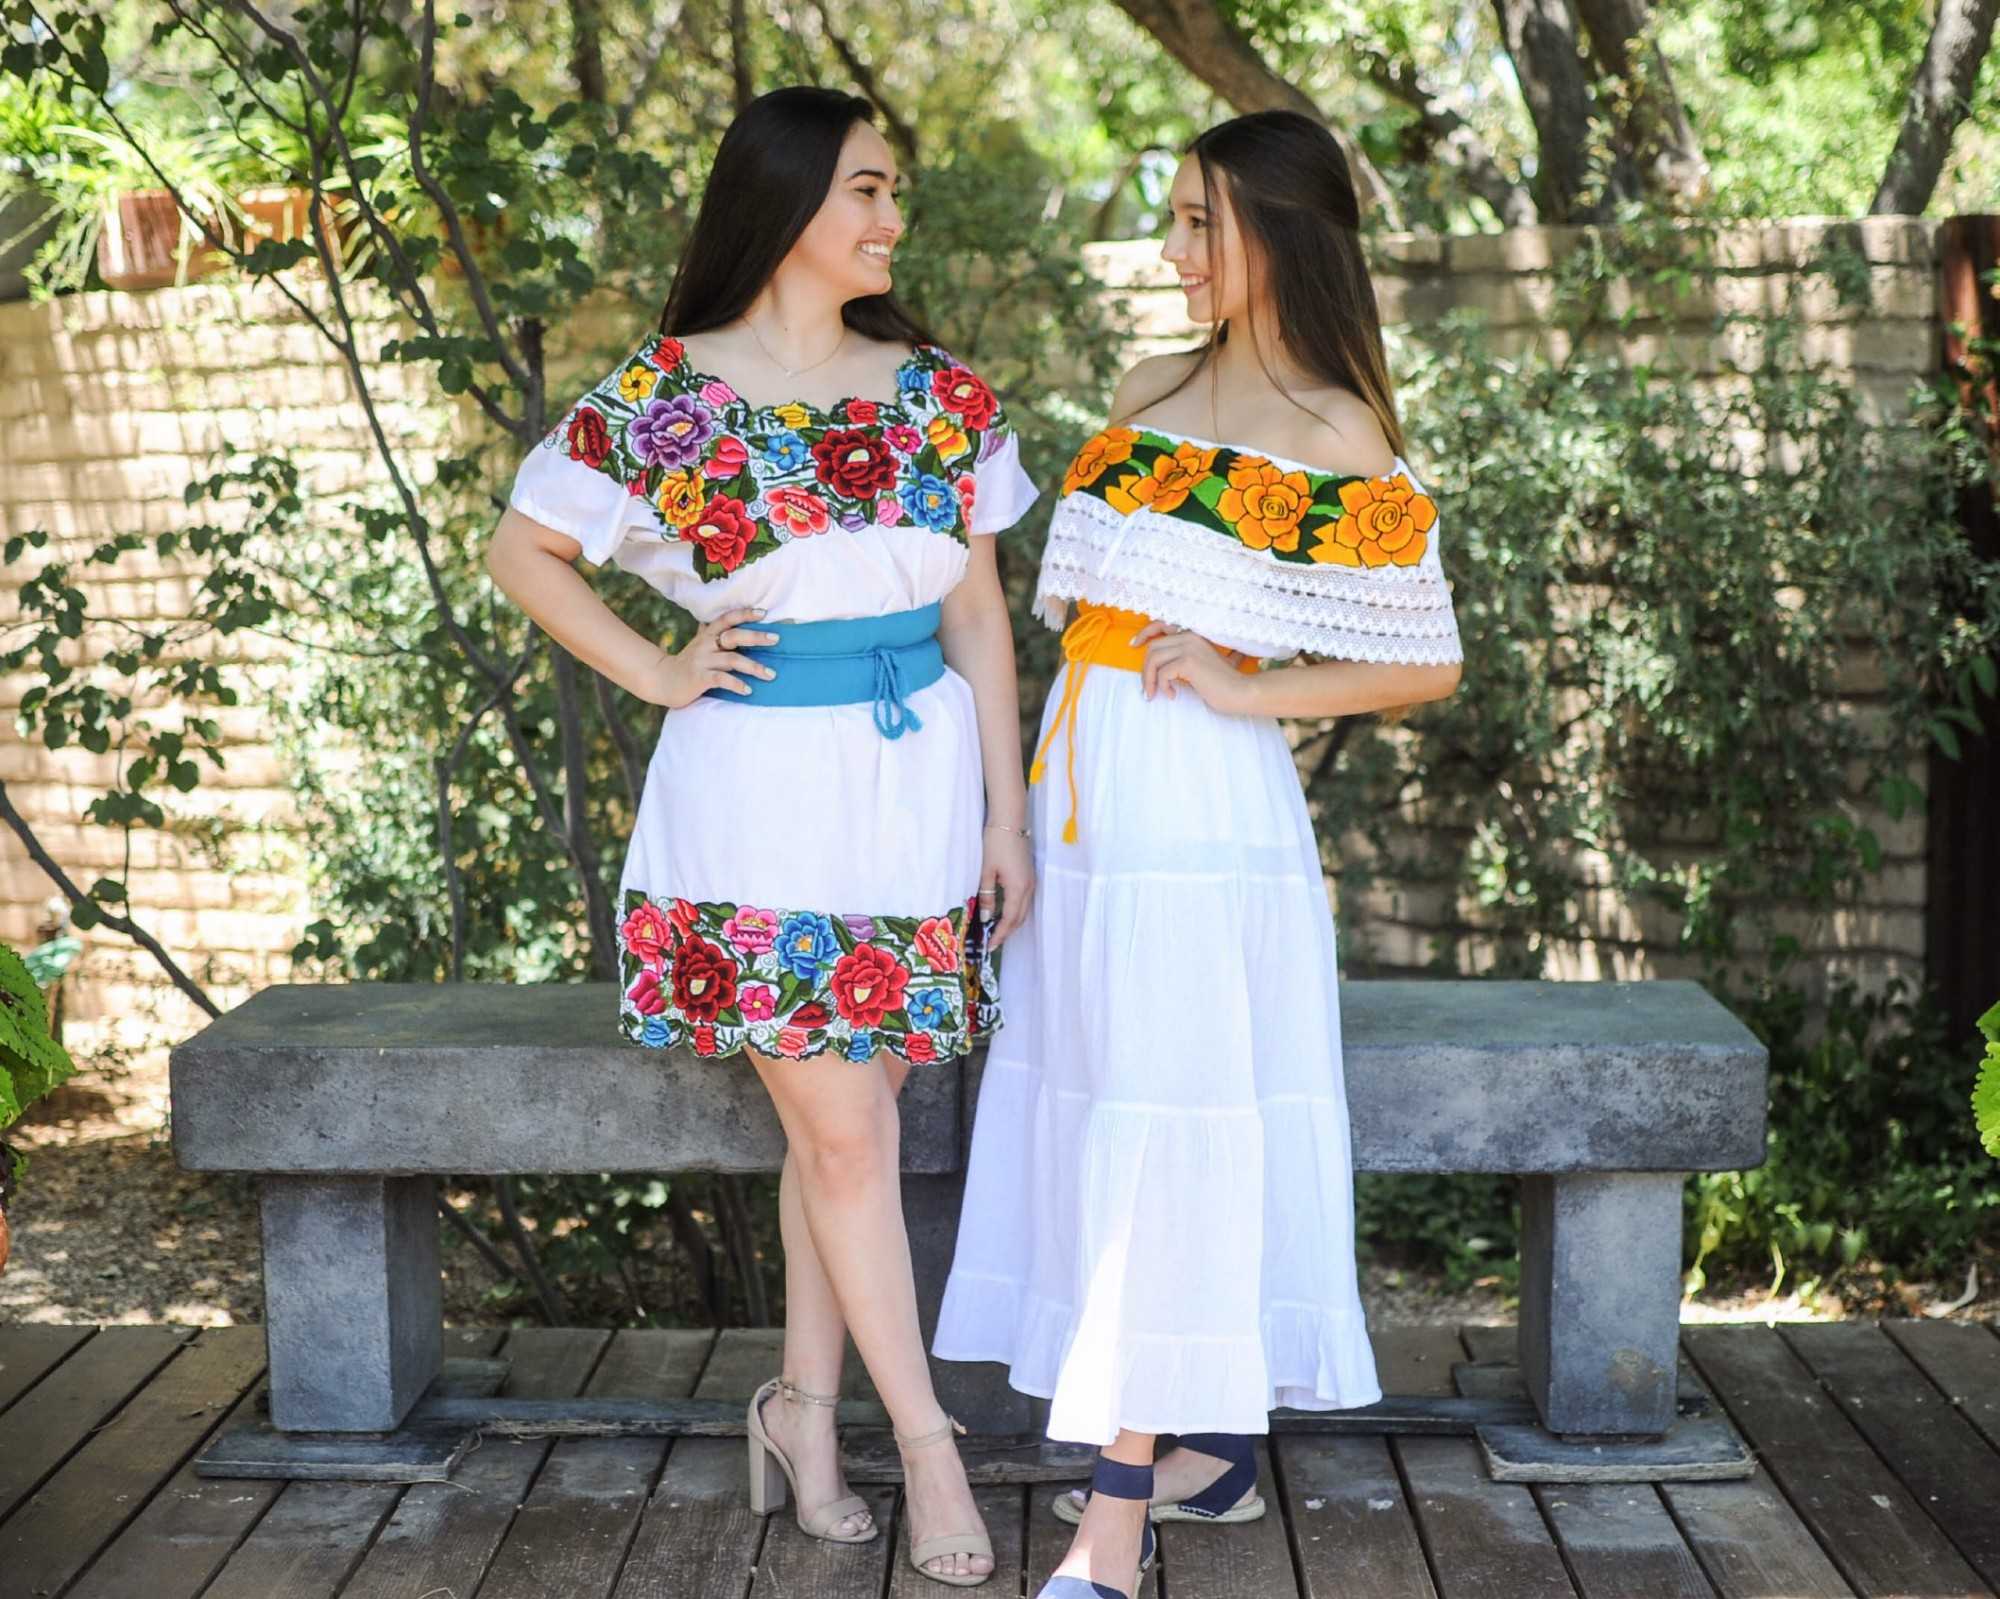 Adela Artisan Made sells products such as dresses, purses, and jewelry all inspired by Mexican traditional culture